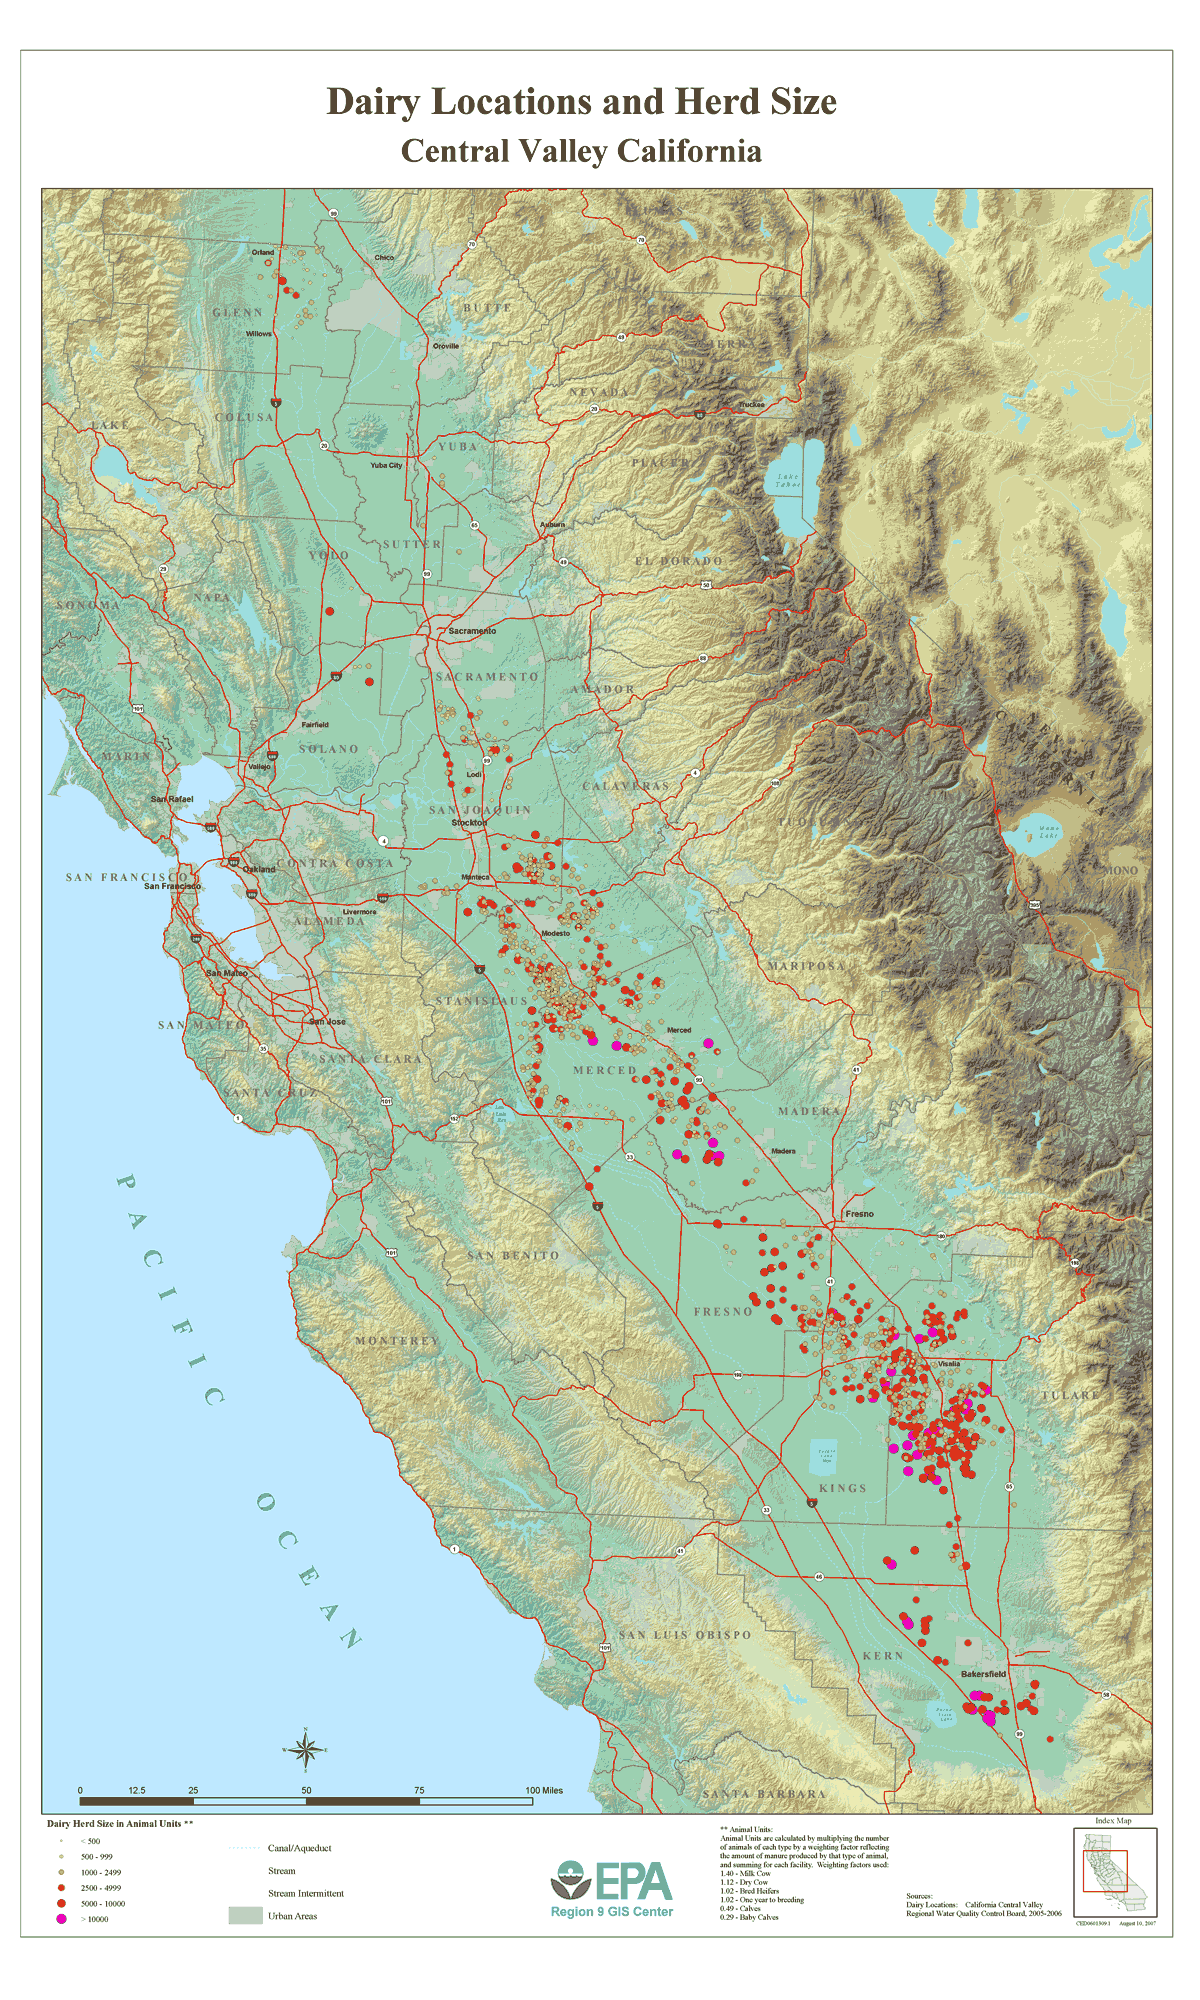 Dairy Locations and Herd Size for Central Vally of California Map